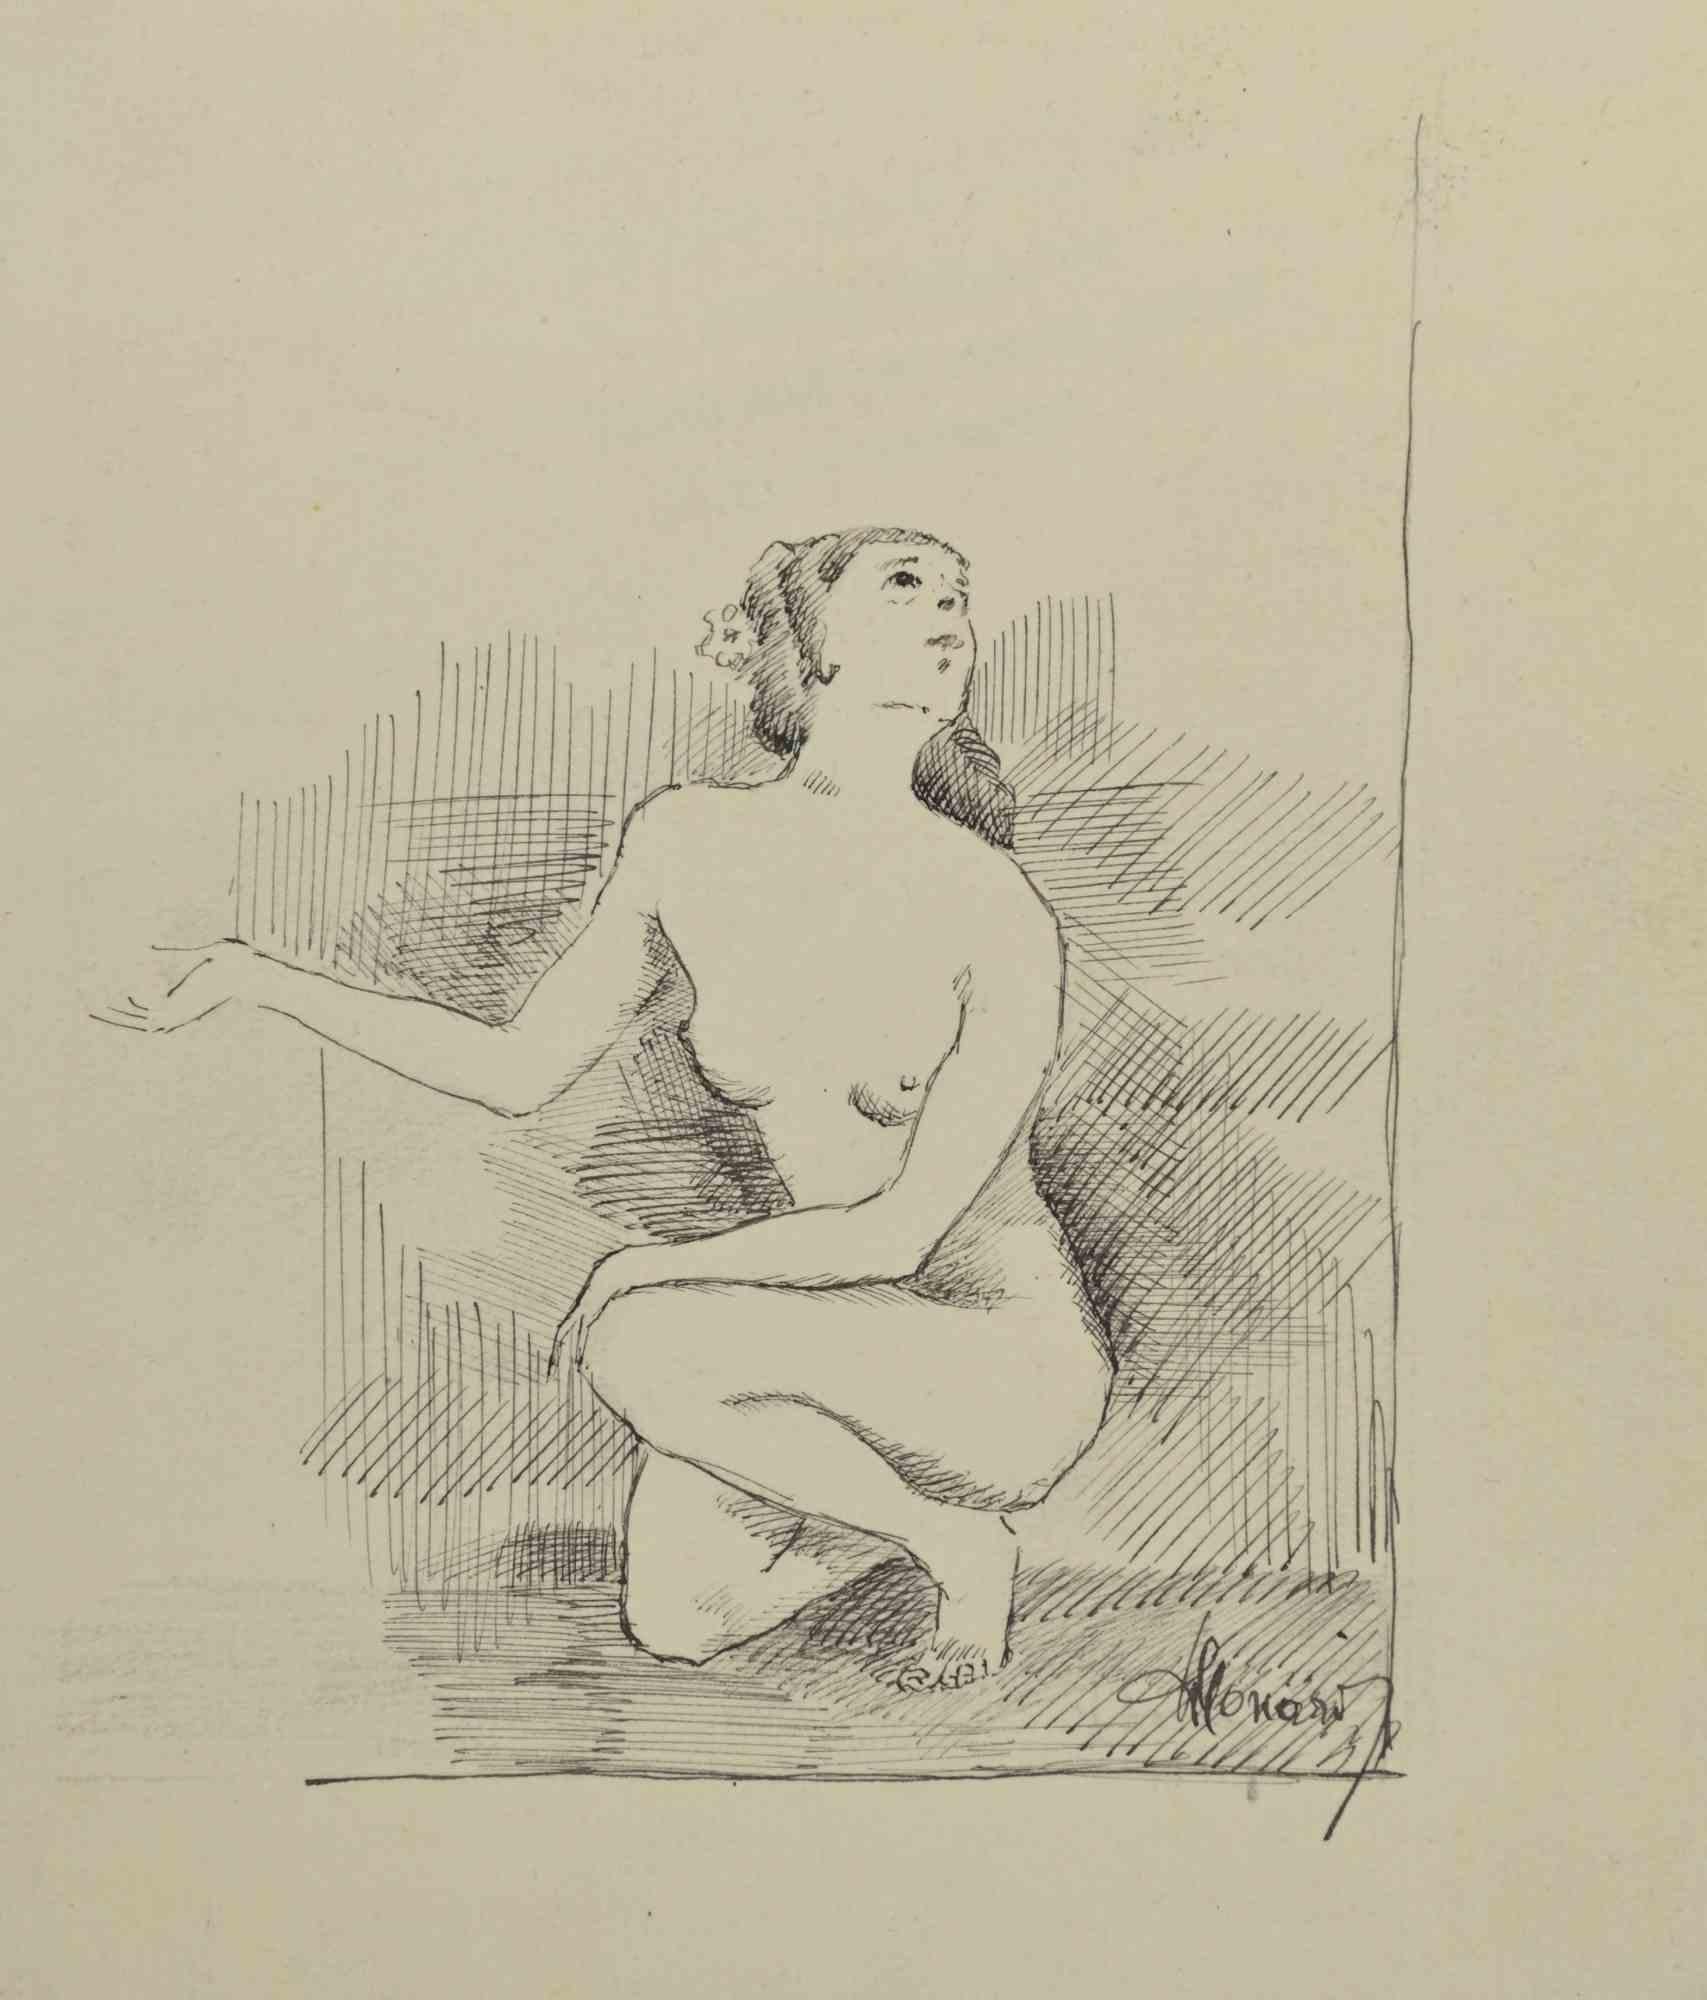 Nude is a Drawing in china ink realized by Augusto Monari in the Early-20th Century.

Hand-signed on the lower.

Good conditions, including a creamy-colored Passepartout.

The artwork is depicted through confident strokes in a well-balanced